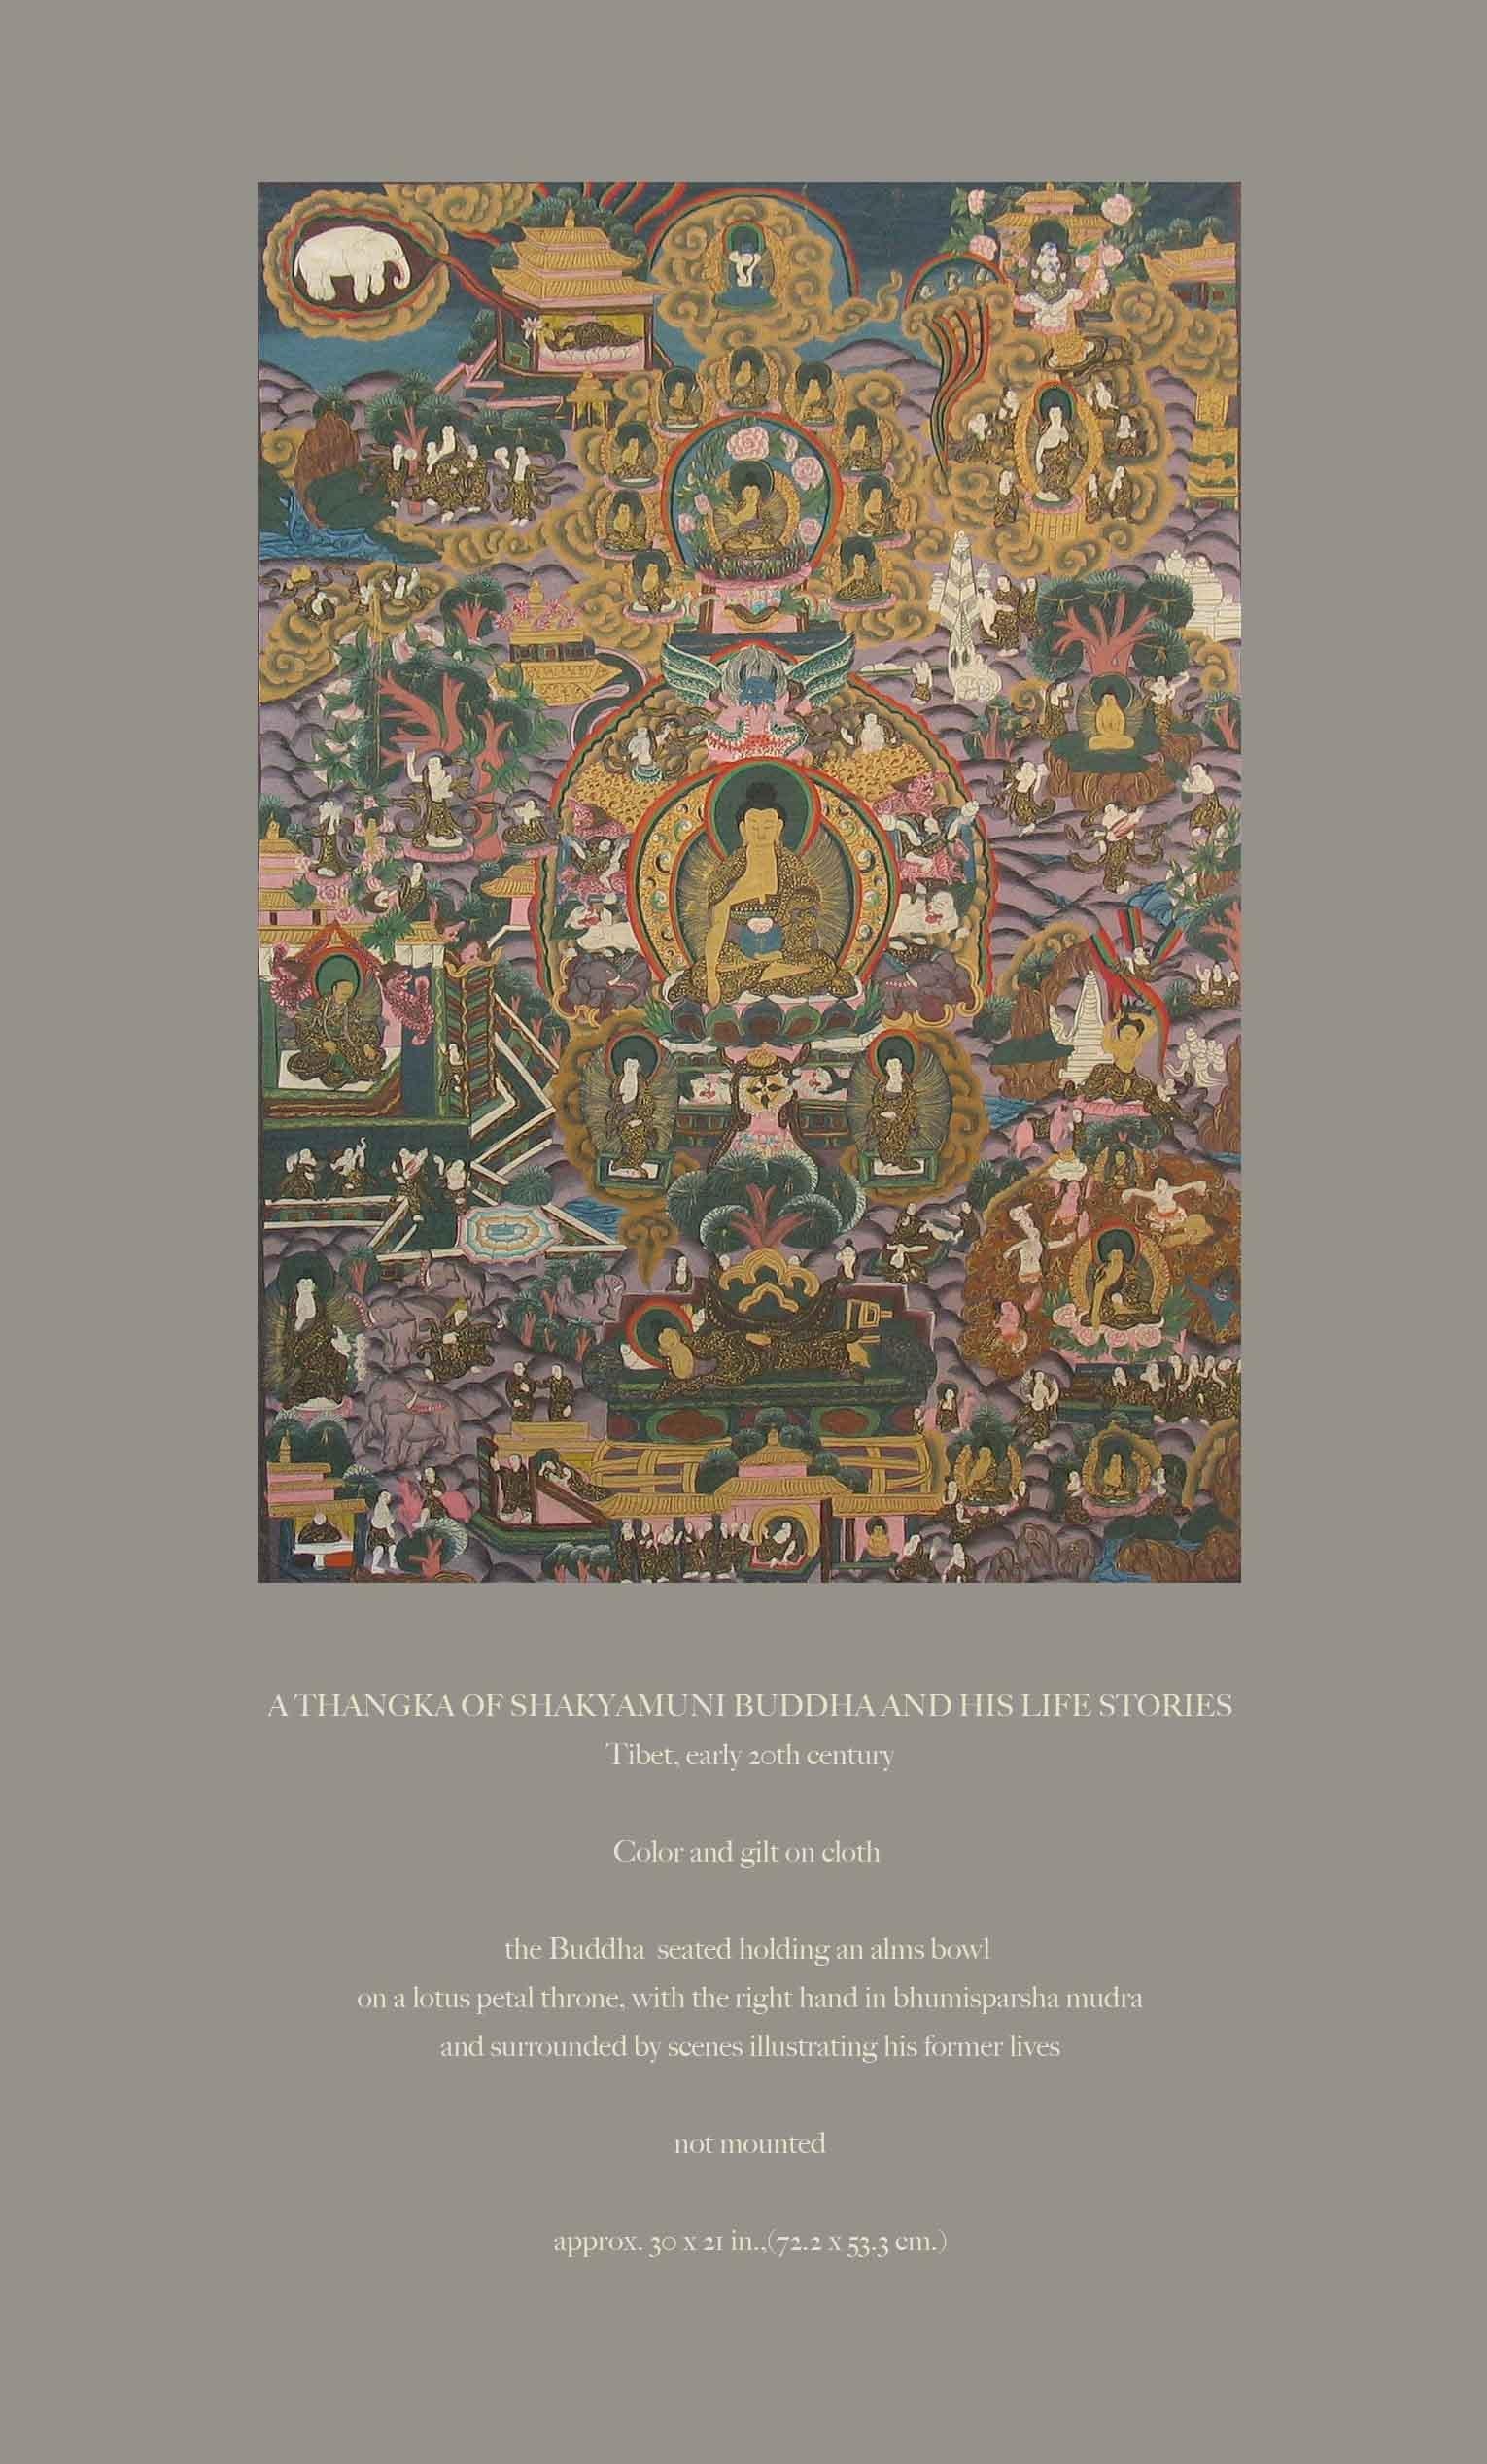 A Thangka Of Shakyamuni Buddha And His Life Stories
Tibet, early 20th century.

Color and gilt on cloth.

The Buddha seated holding an alms bowl 
on a lotus petal throne, with the right hand in bhumisparsha mudra
and surrounded by scenes